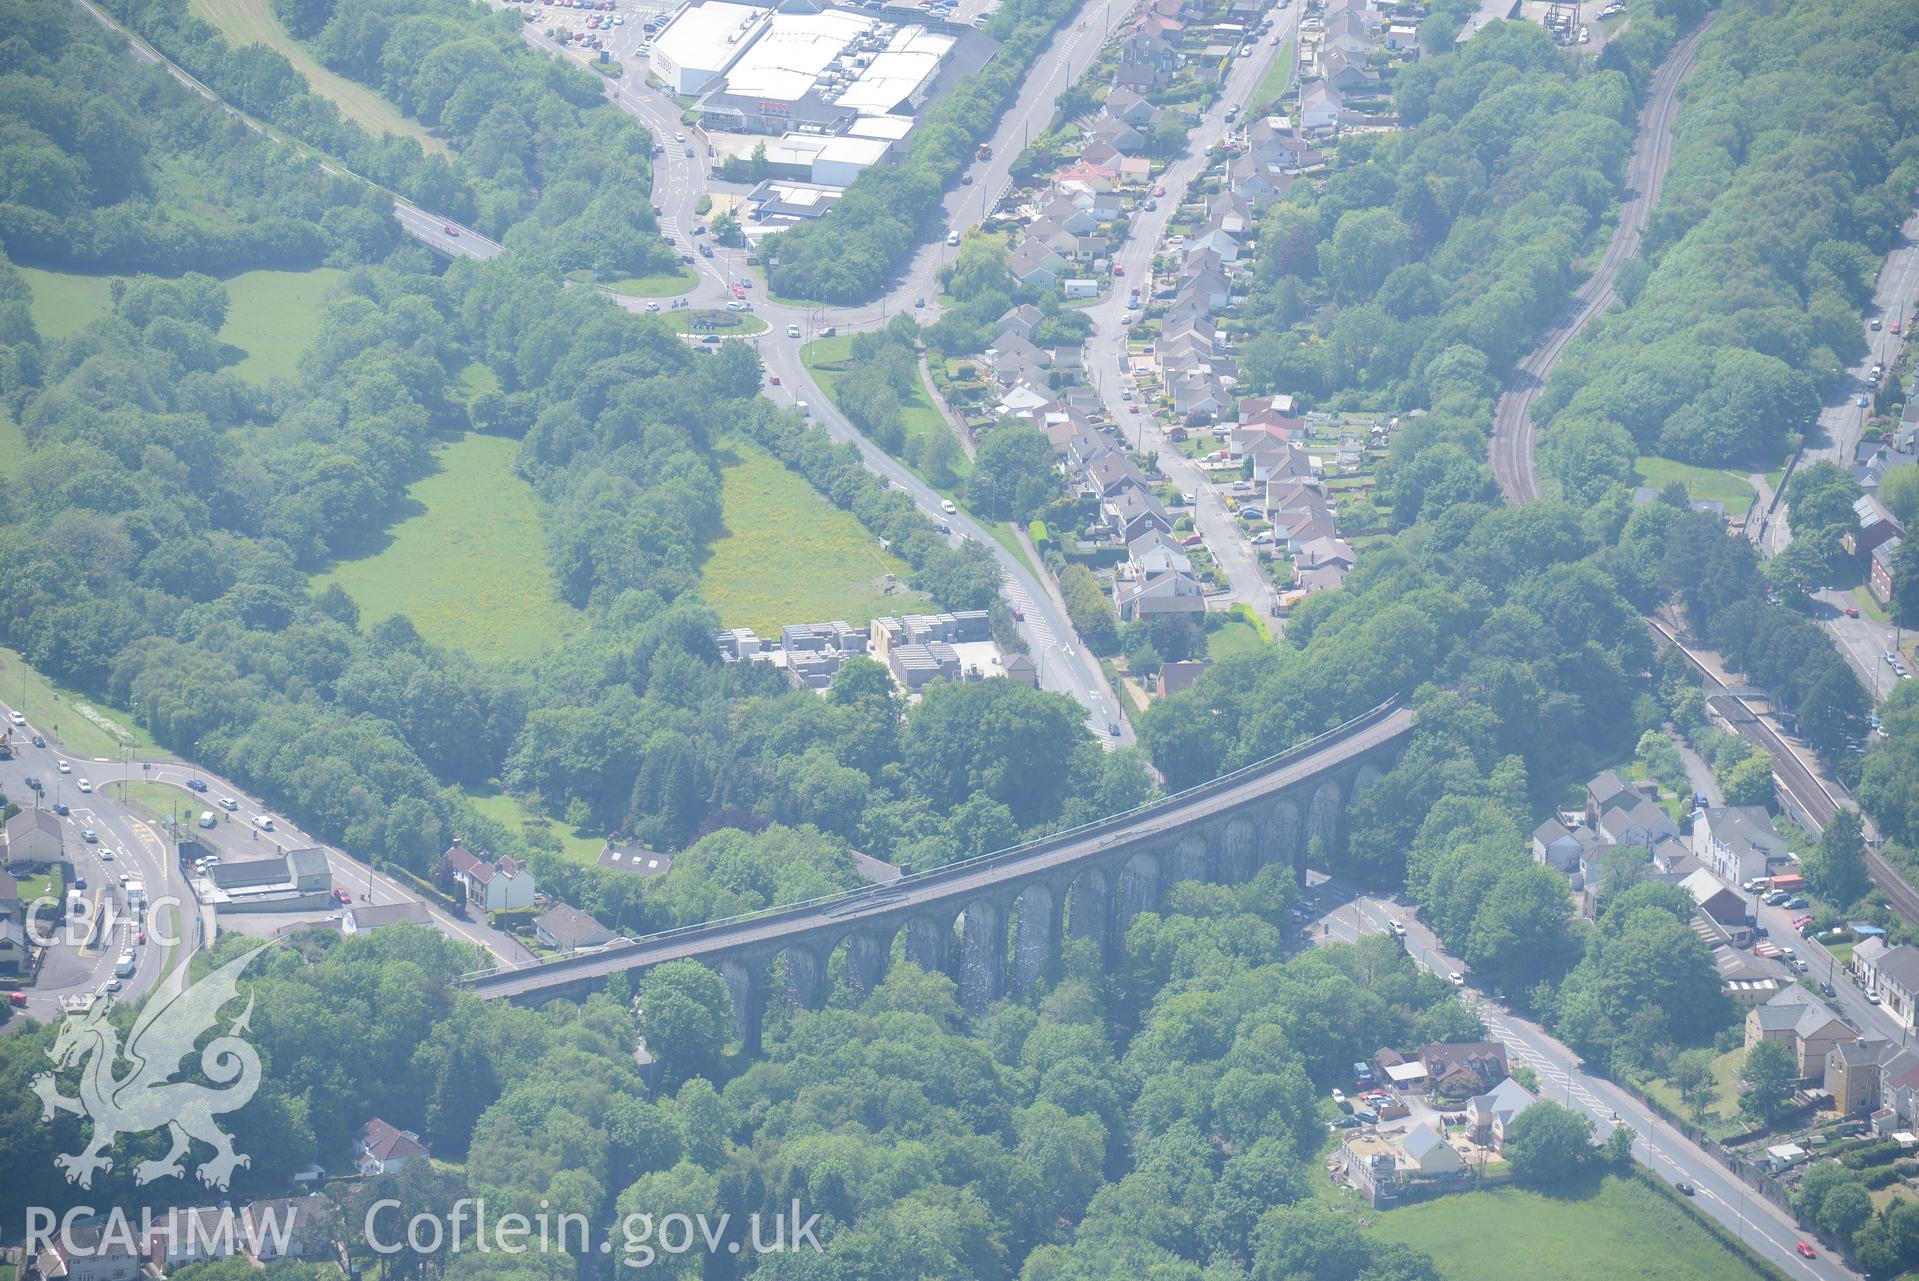 Viaduct between the villages of Maesycwmmer and Hengoed, near Ystrad Mynach. Oblique aerial photograph taken during the Royal Commission's programme of archaeological aerial reconnaissance by Toby Driver on 11th June 2015.